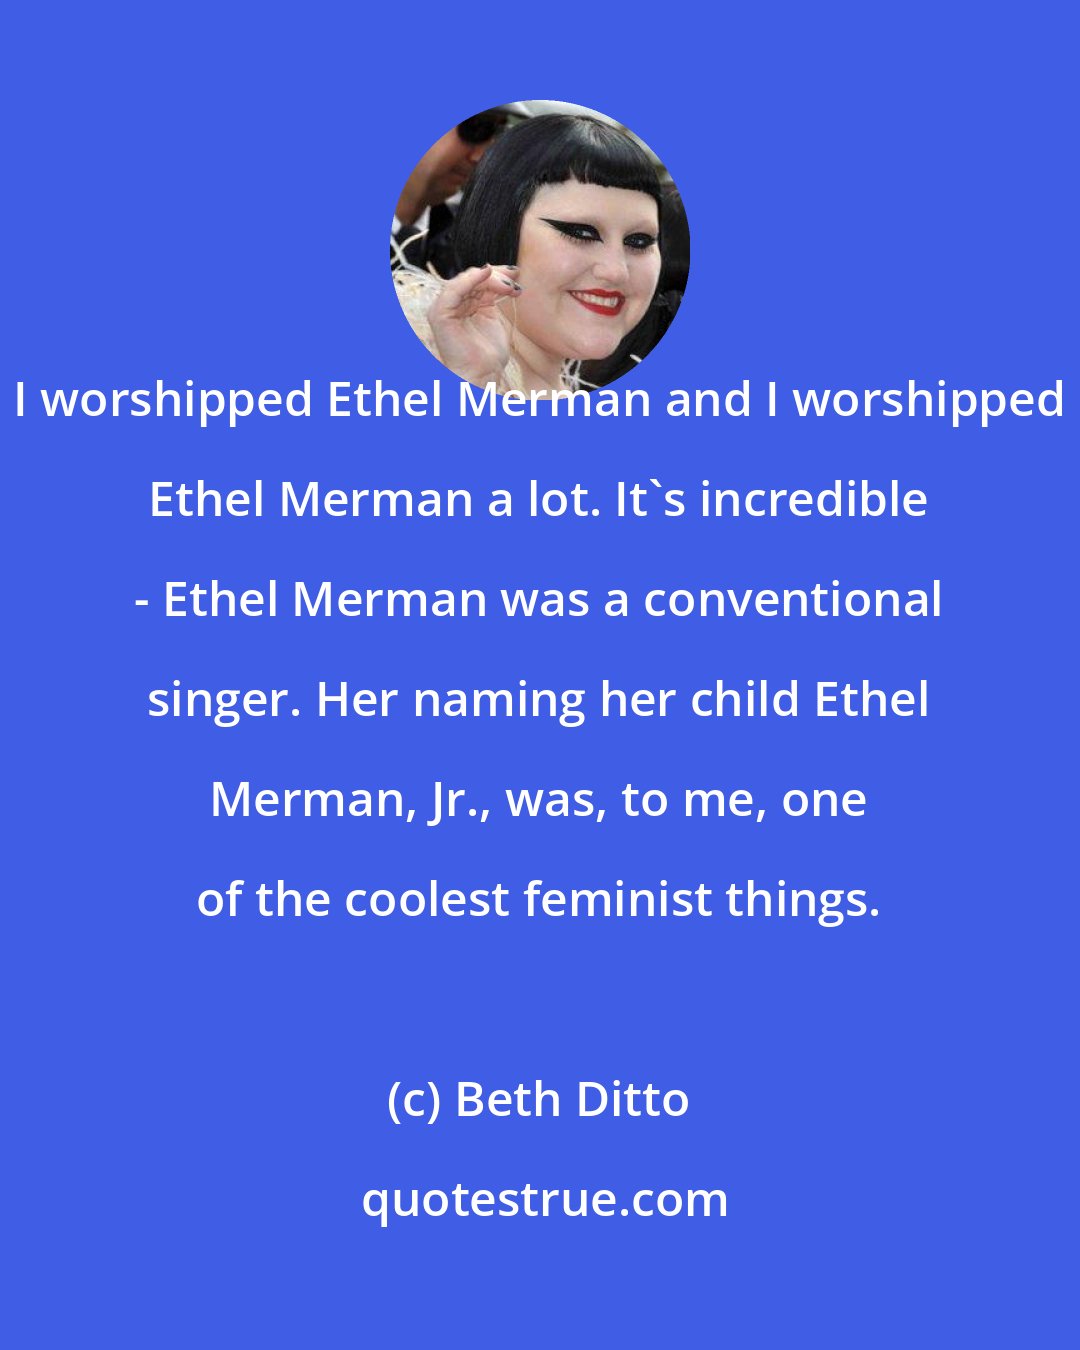 Beth Ditto: I worshipped Ethel Merman and I worshipped Ethel Merman a lot. It's incredible - Ethel Merman was a conventional singer. Her naming her child Ethel Merman, Jr., was, to me, one of the coolest feminist things.